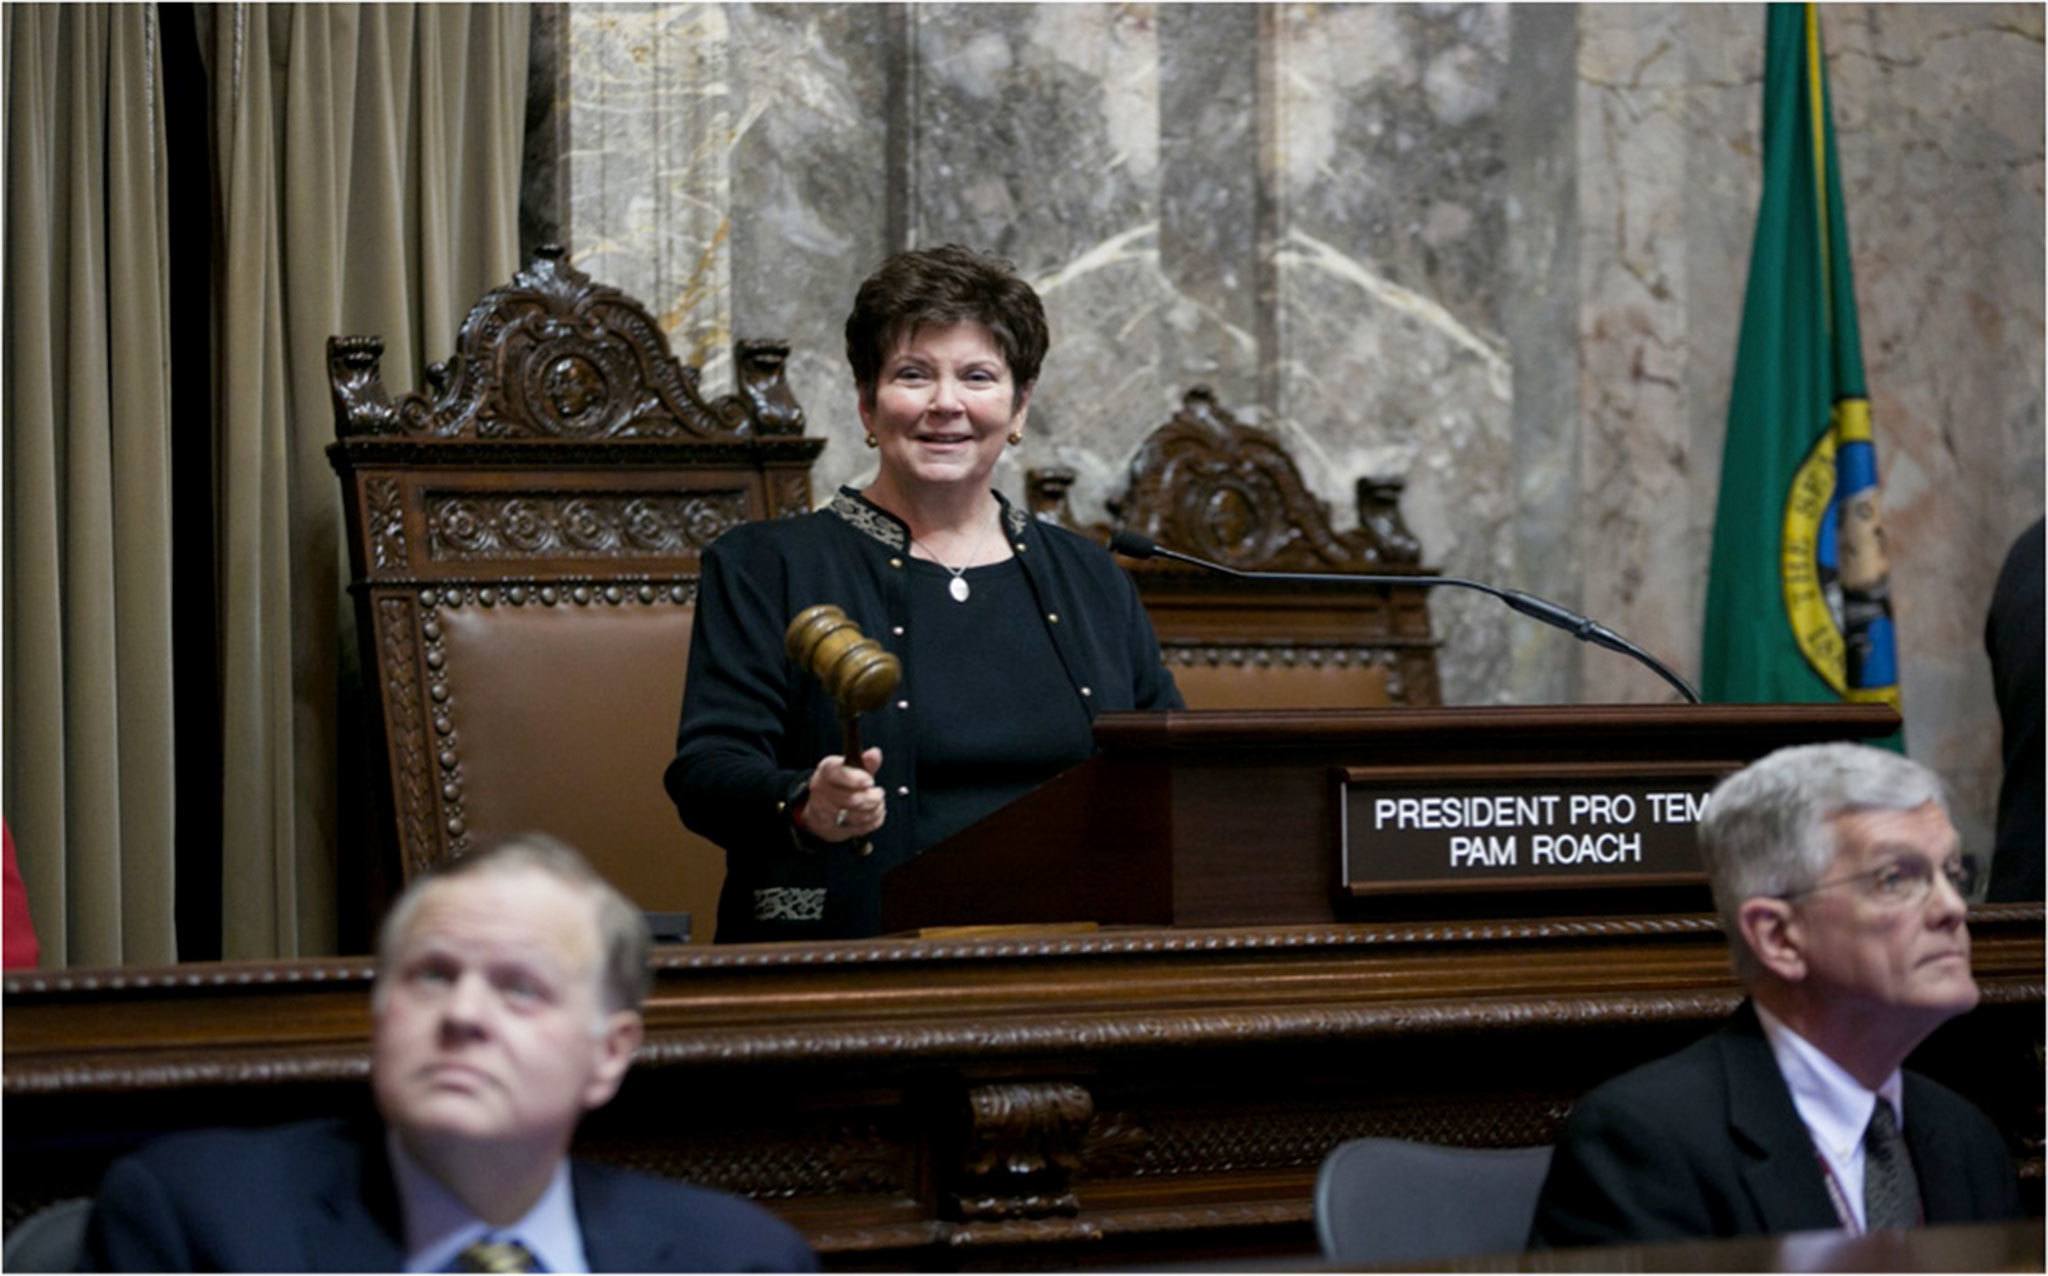 Sen. Pam Roach plans to step down from the Legislature Jan. 3, ending a 26-year-career in Olympia. “It has been a sincere honor and privilege to represent the good people of the 31st District,” she said. COURTESY PHOTO